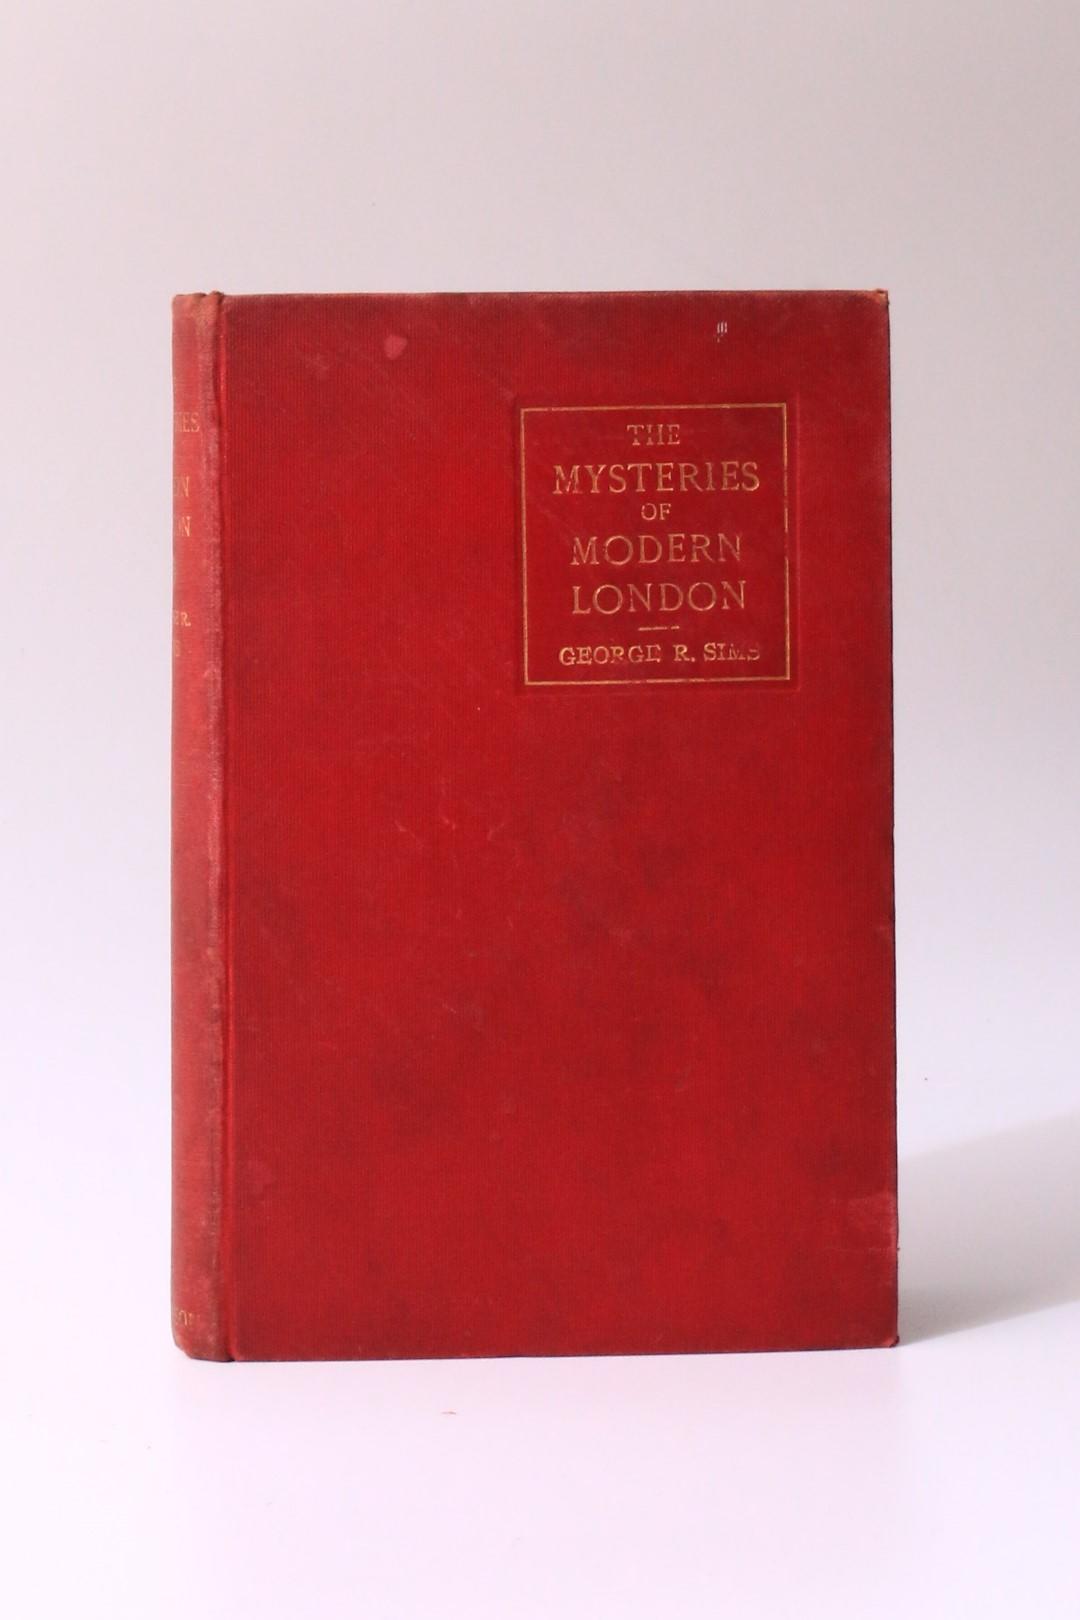 George R. Sims - The Mysteries of Modern London - Arthur Pearson, 1906, First Edition.